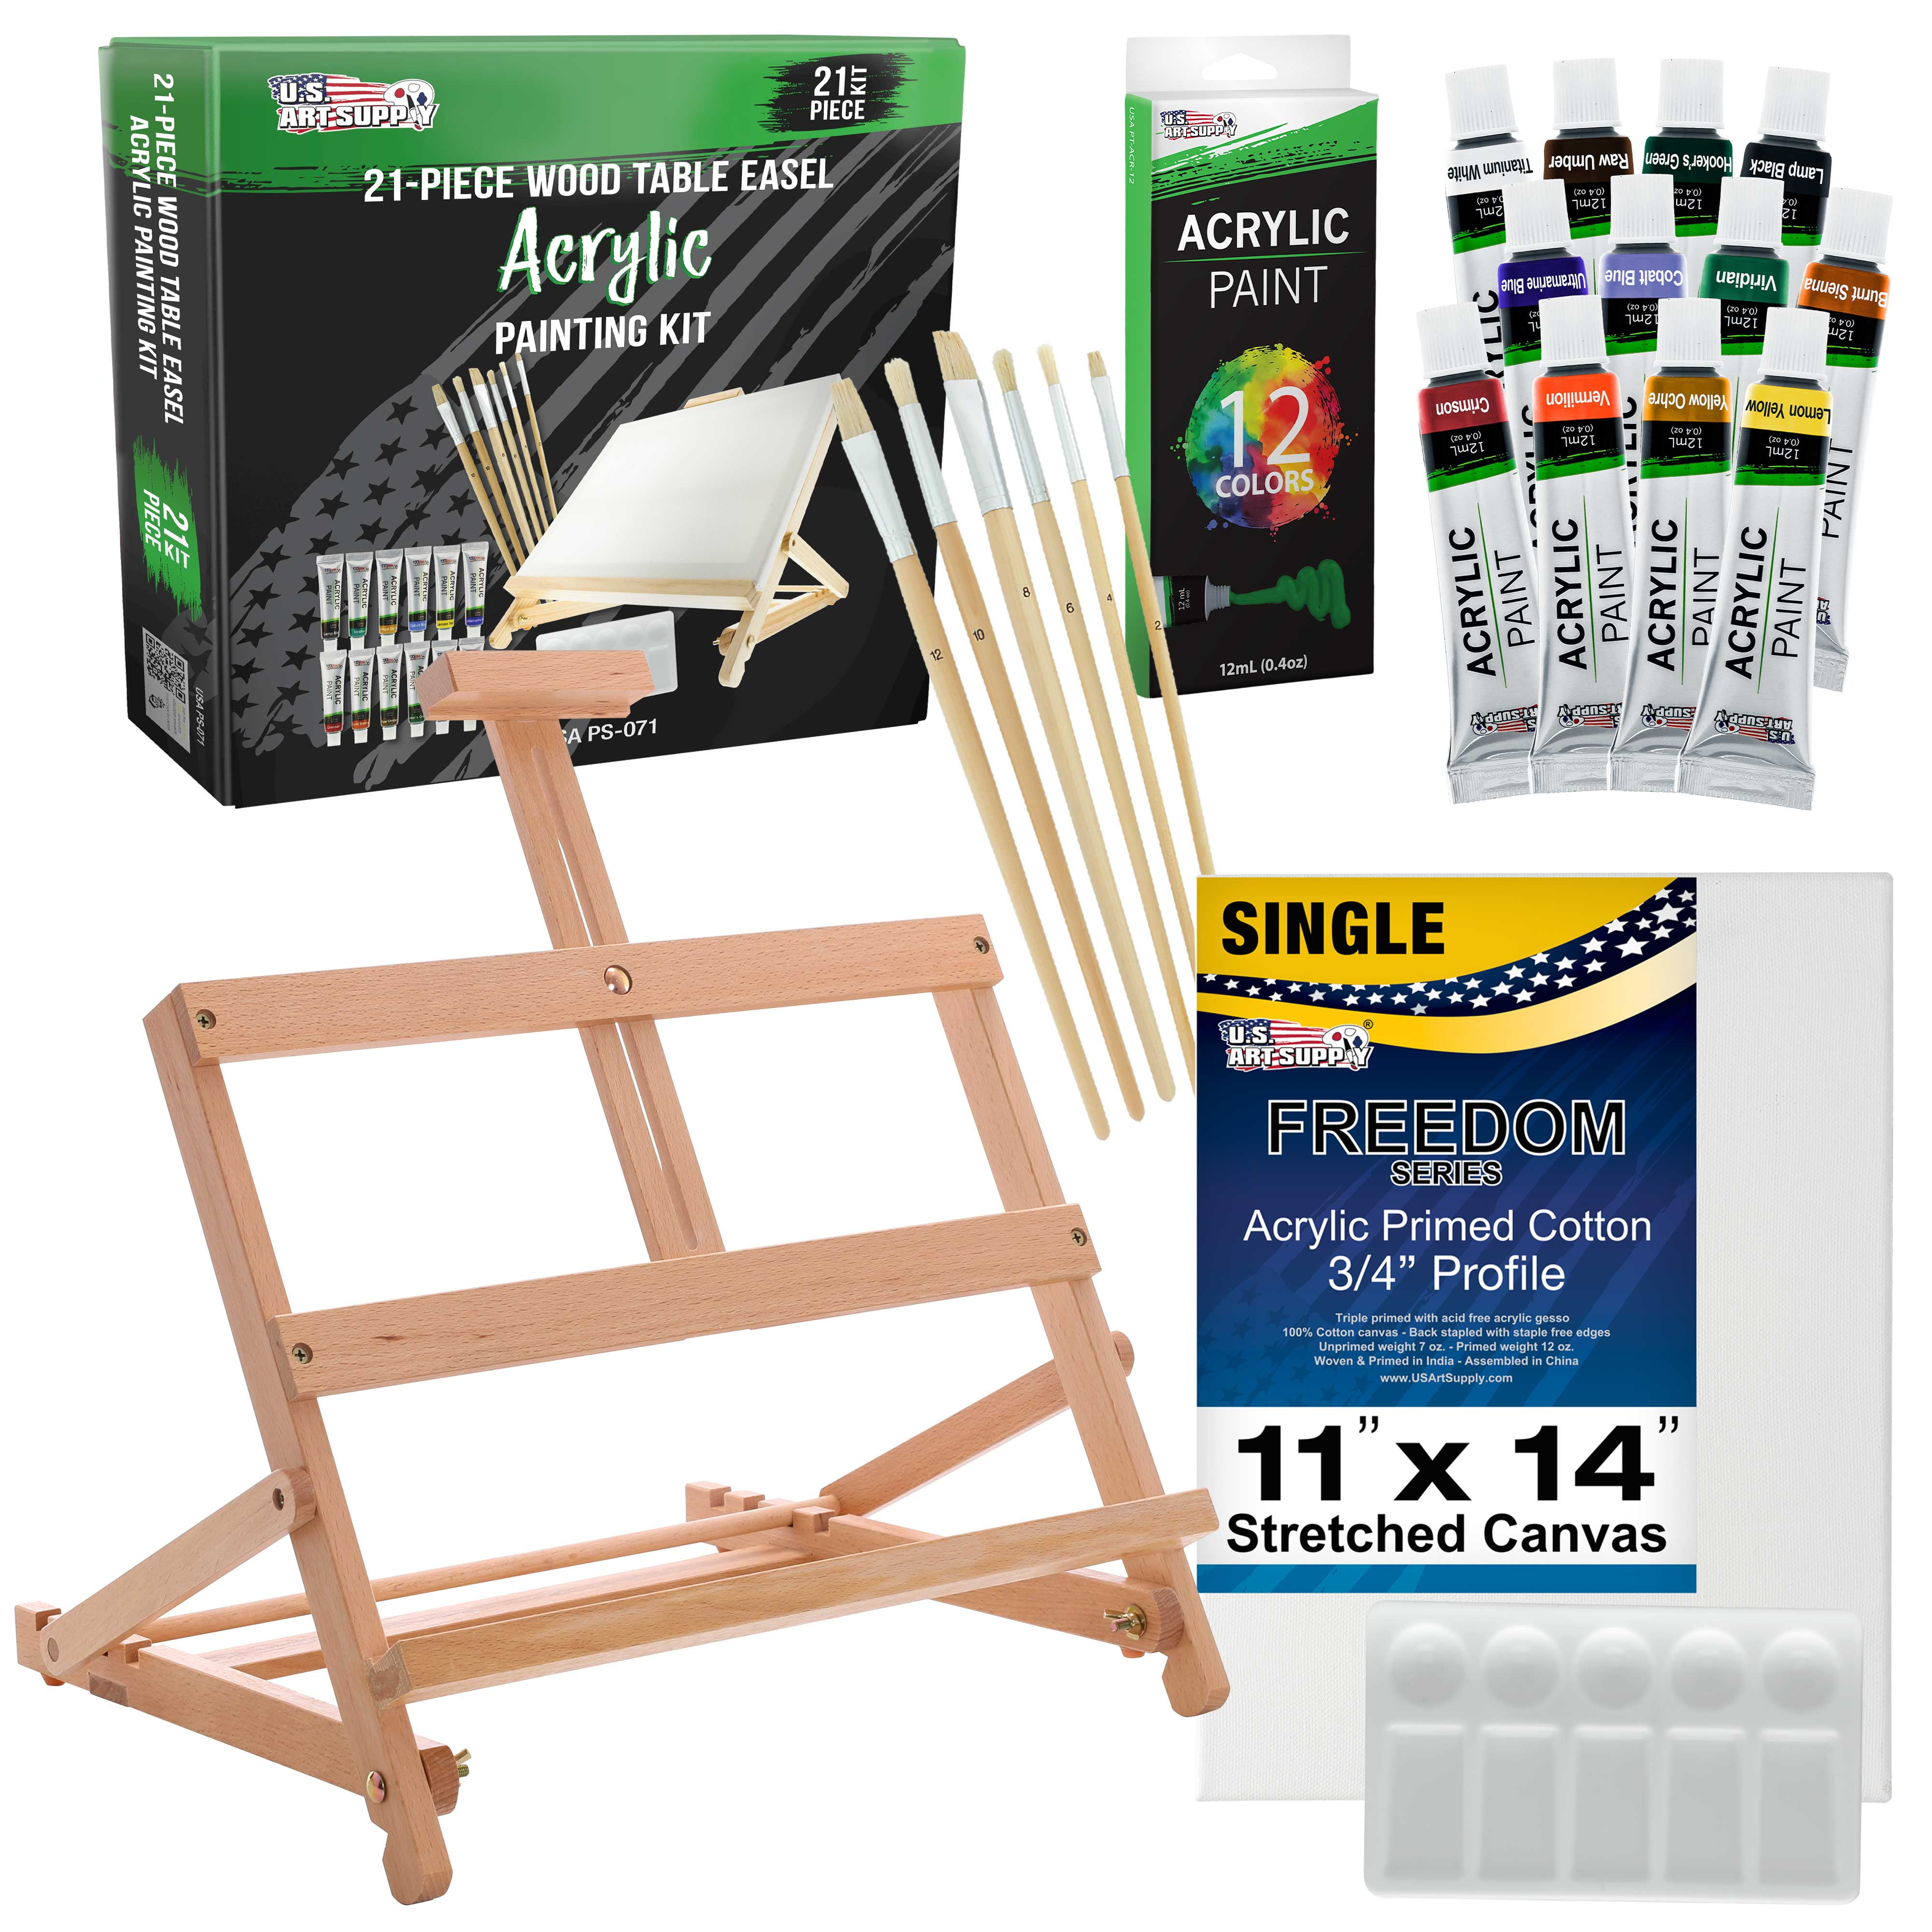 Acrylic Paint Set with 12 Art Brushes, 24 Colors (2 oz/Bottle) Acrylic Paint for Painting Canvas, Wood, Ceramic and Fabric, Paint Set for Beginners